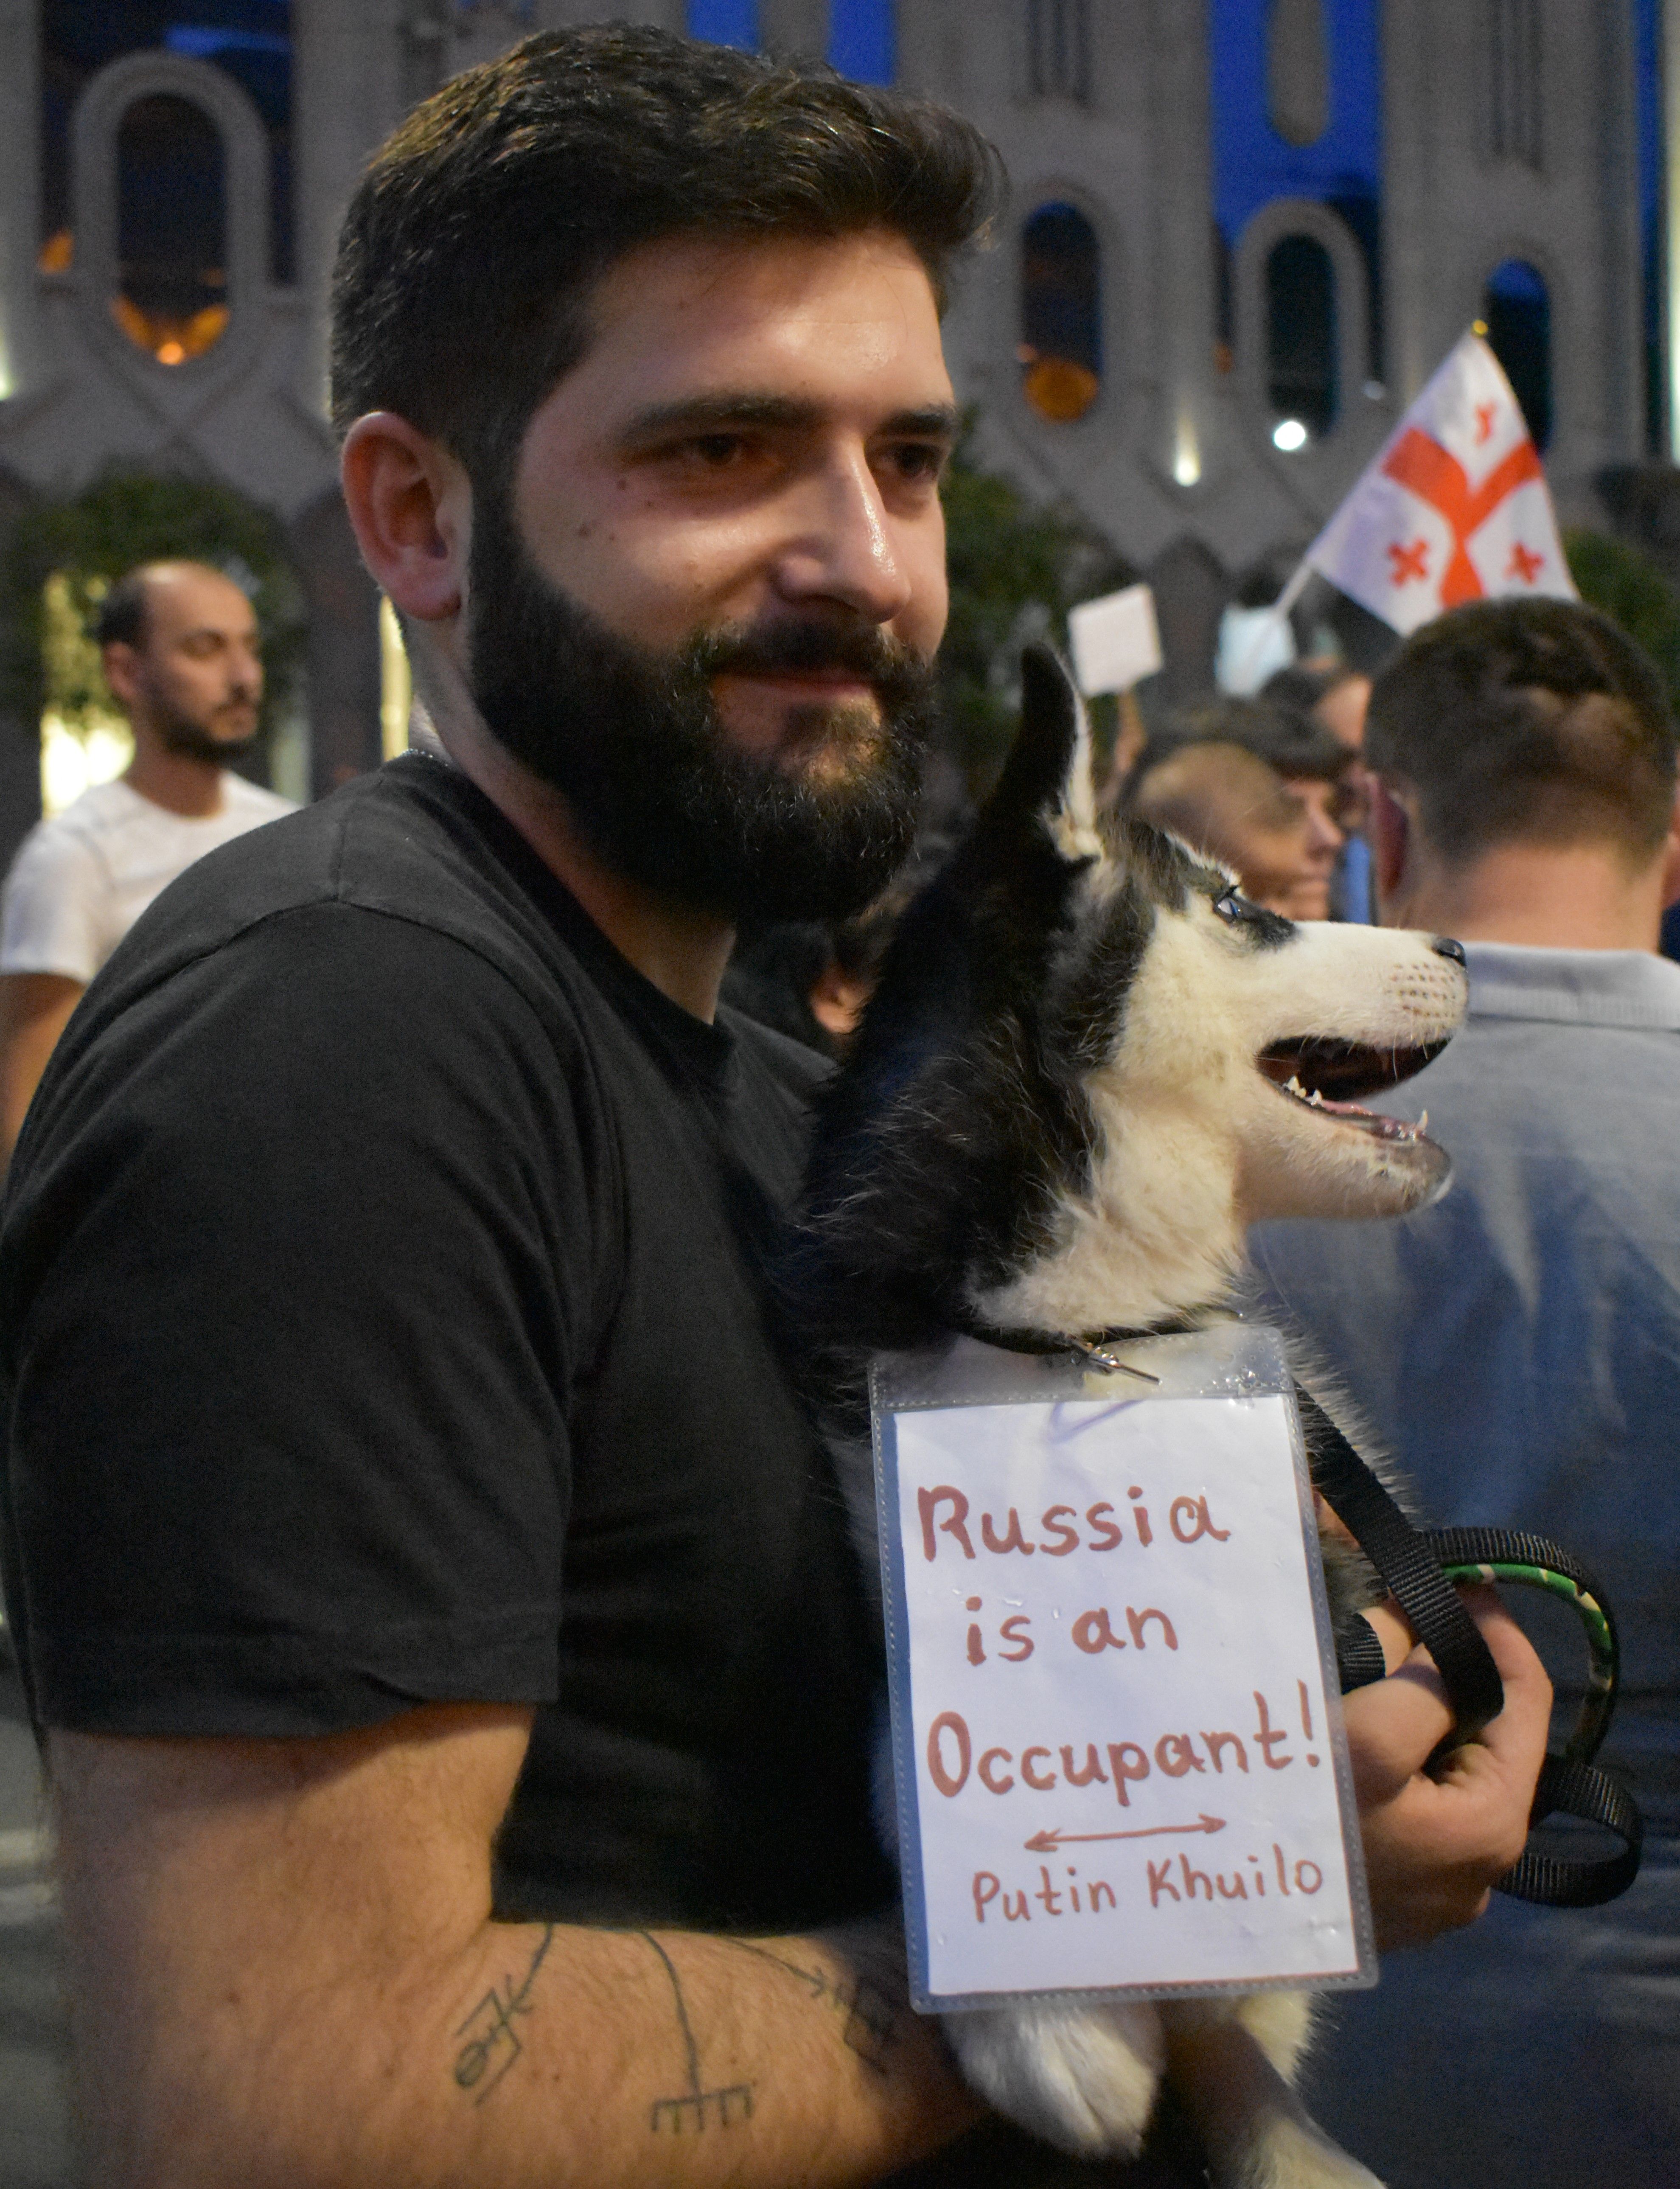 Archa, 28, protests against Russia in front of the Georgian Parliament. Image by Kaitlyn Johnson. Georgia, 2019.